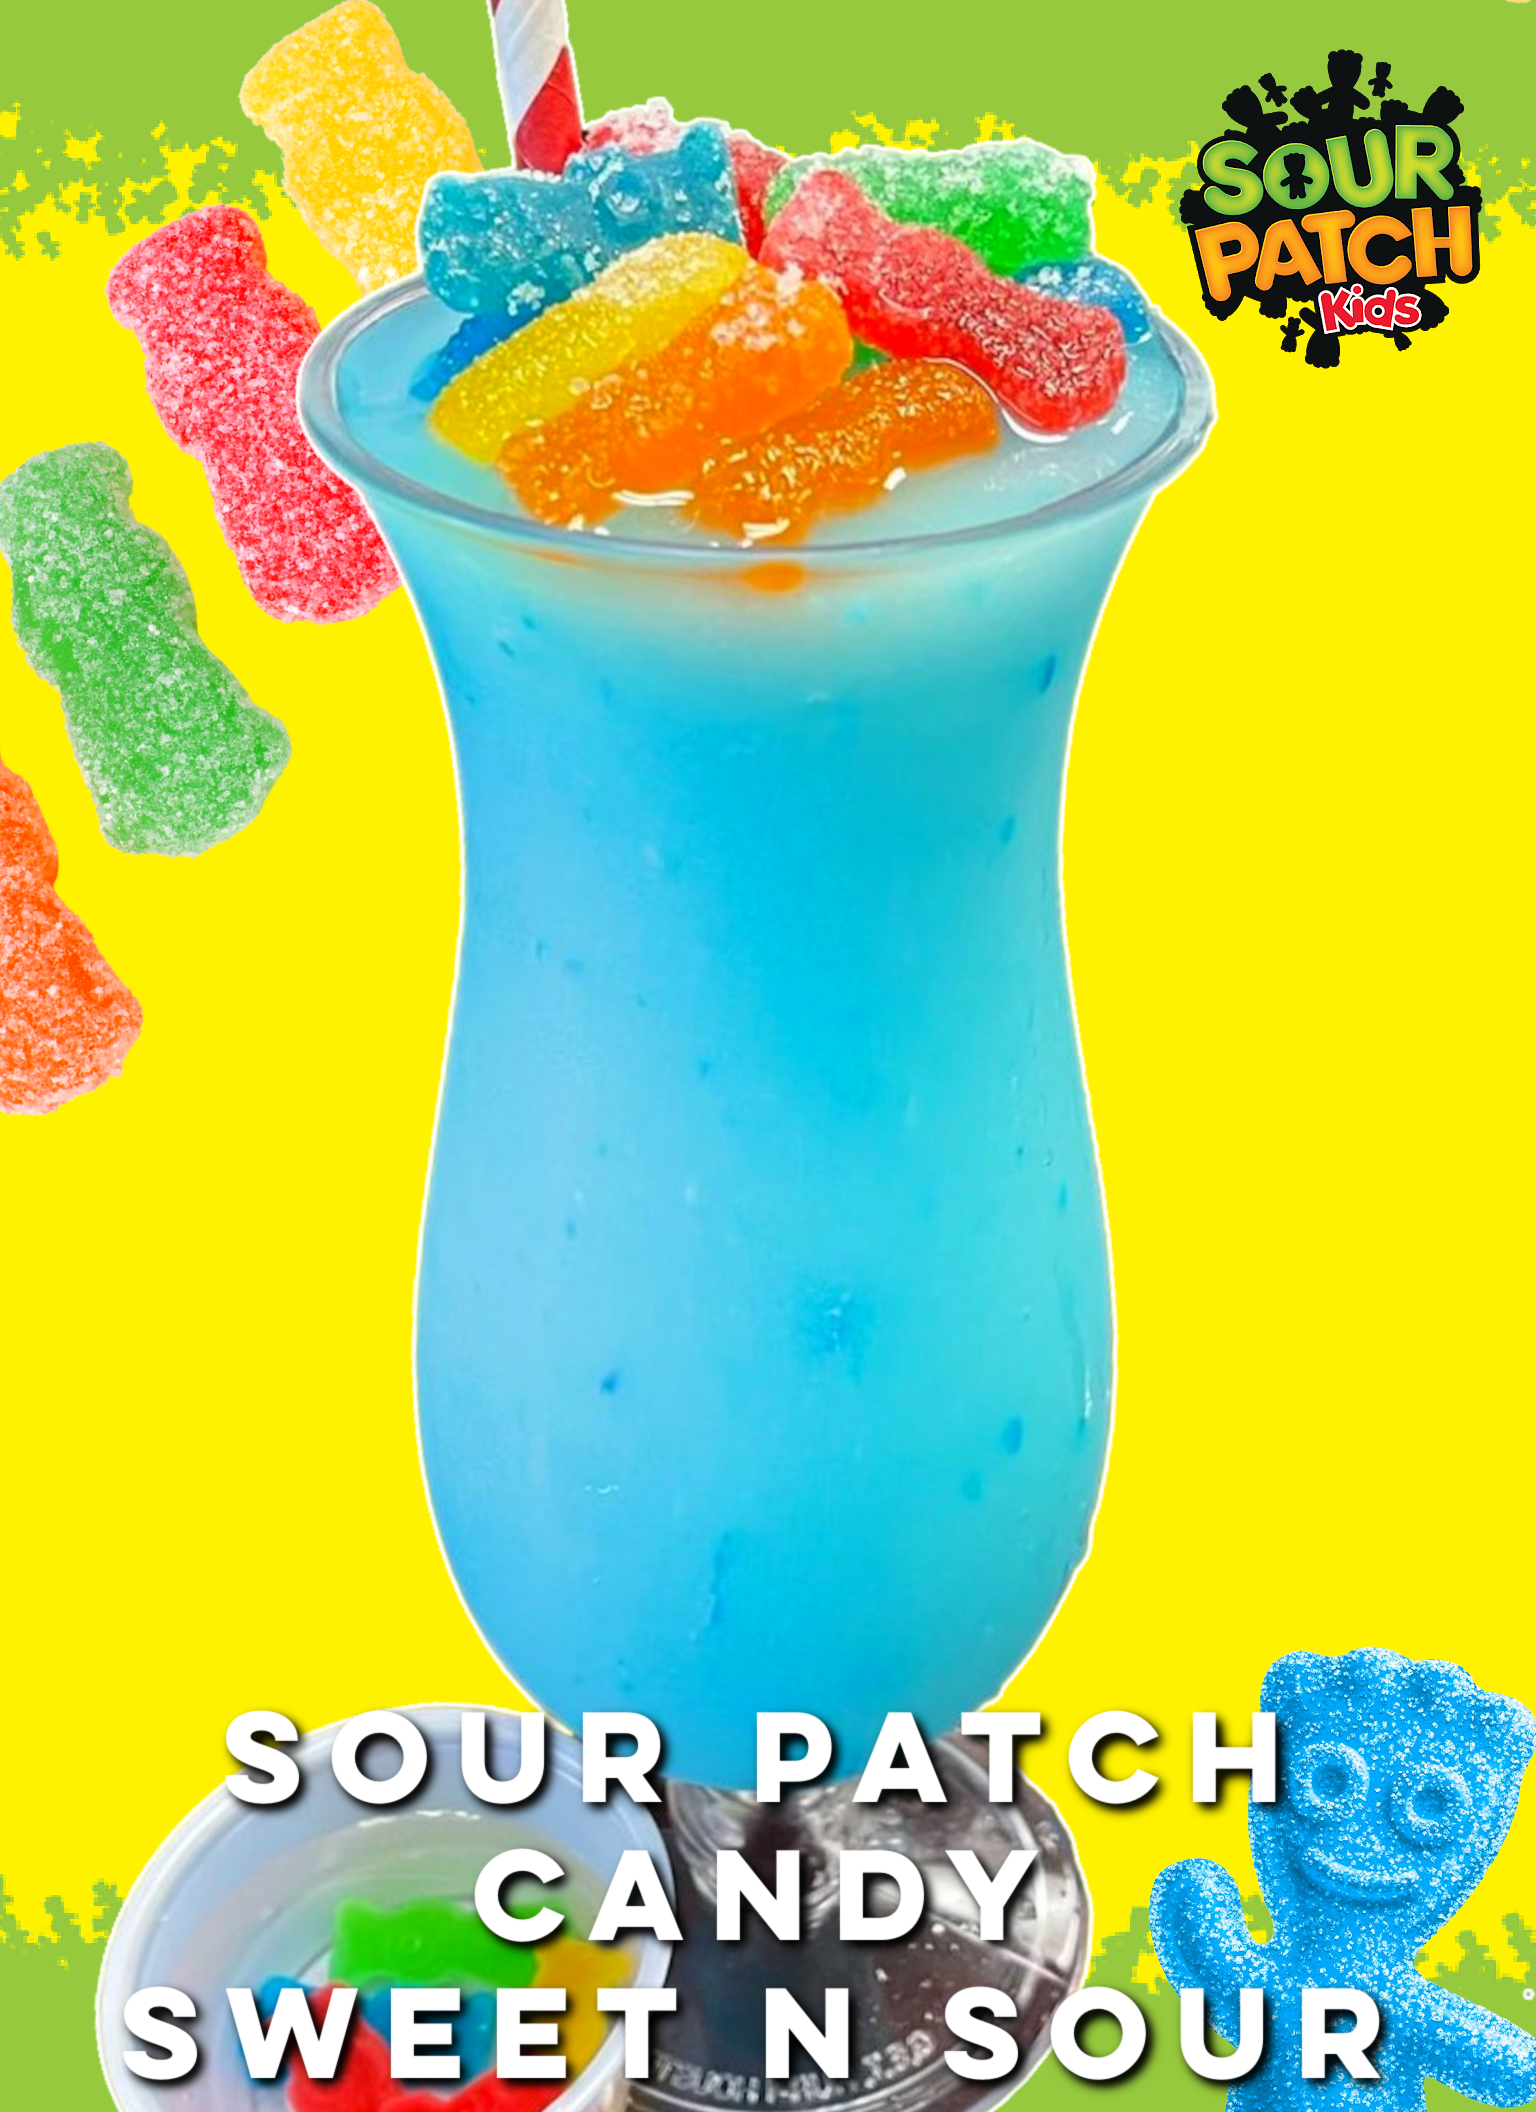 Sourpatch Candy Sour & Sweet Daiquiri